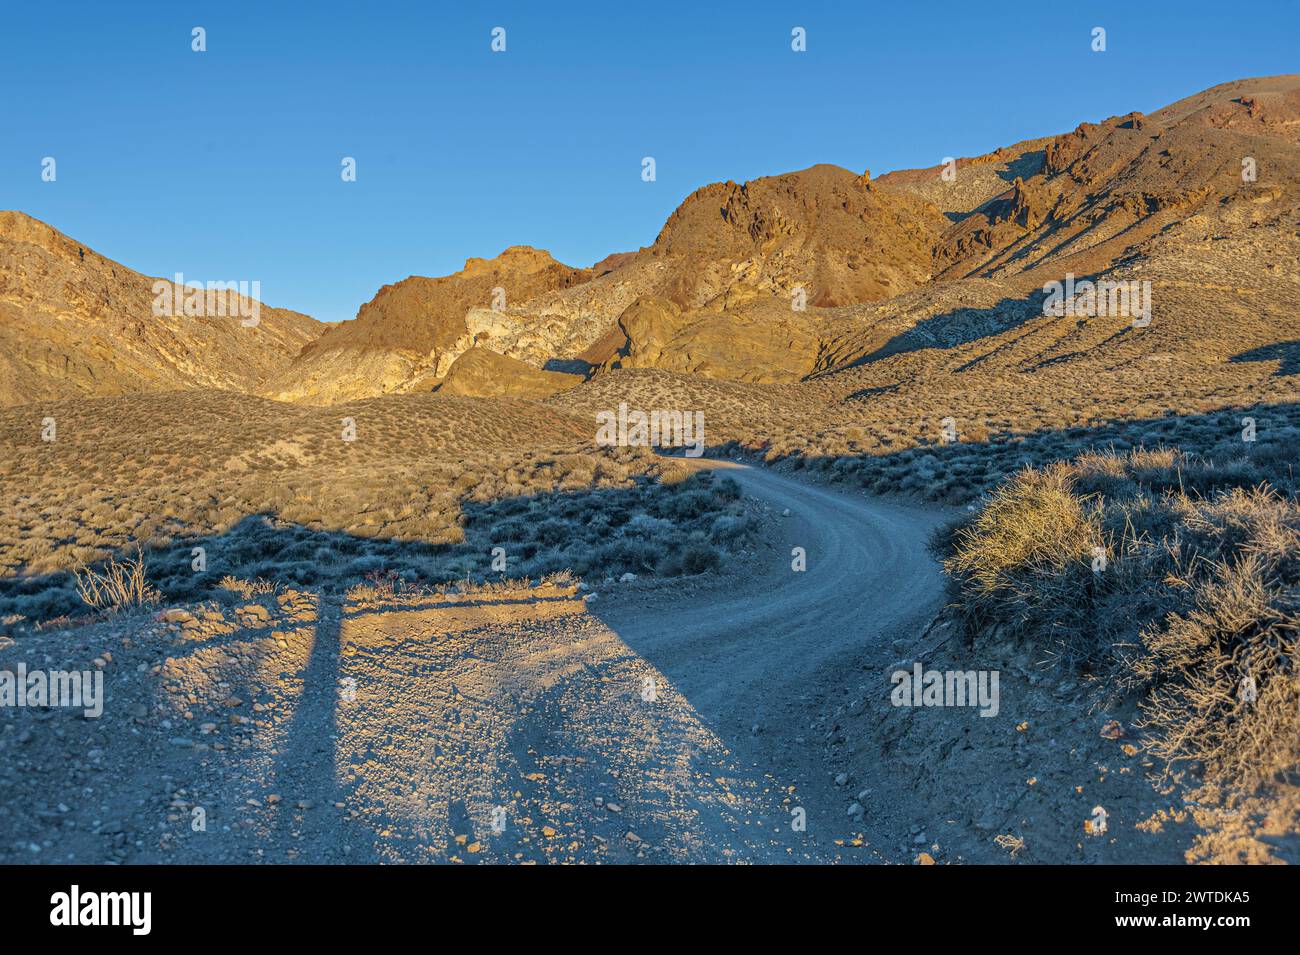 Dirt road through Death Valley Stock Photo